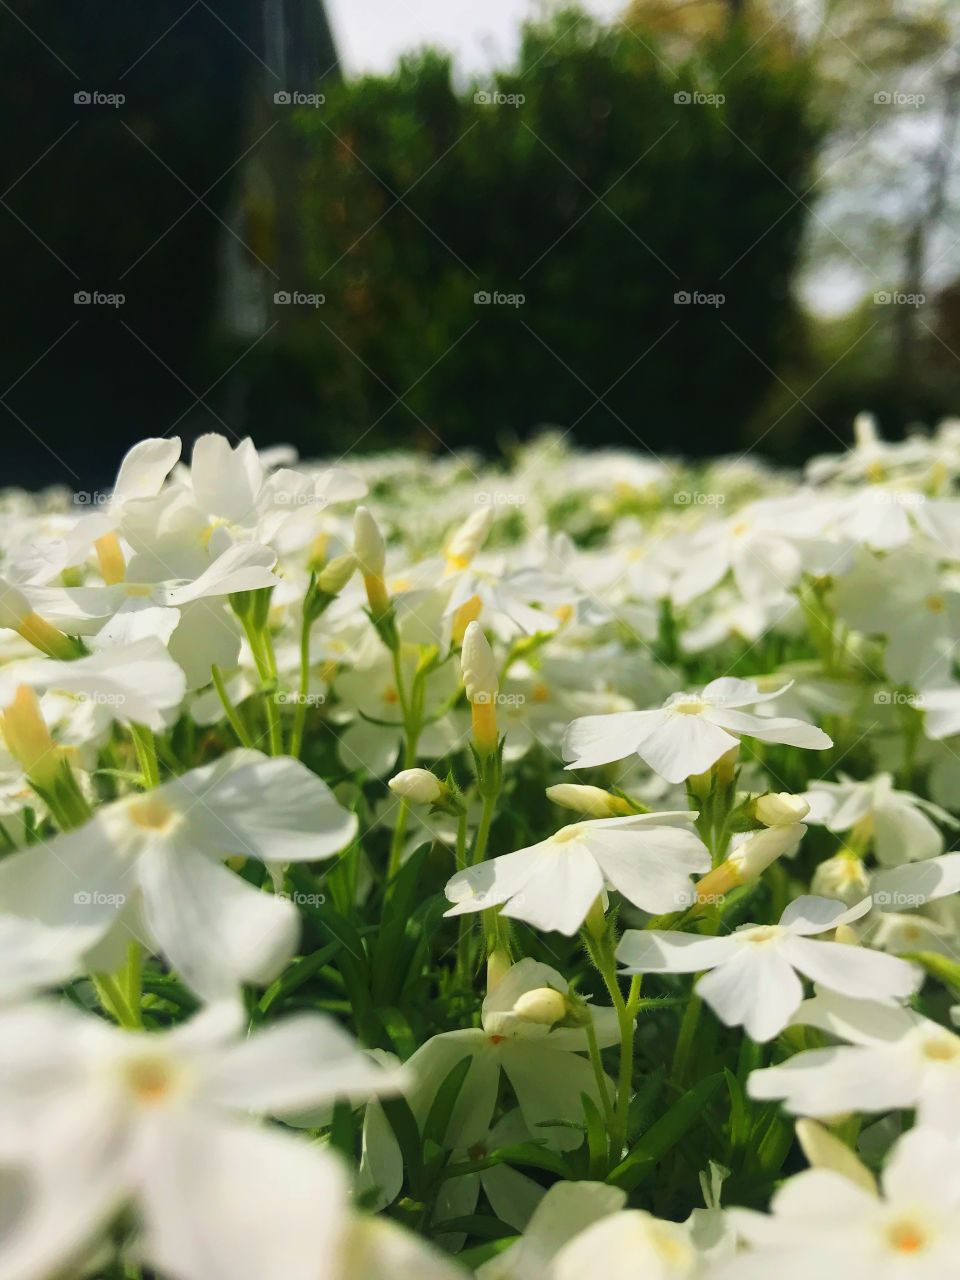 Close up of small white phlox followers blooming in a large, overgrown bush on a warm spring day